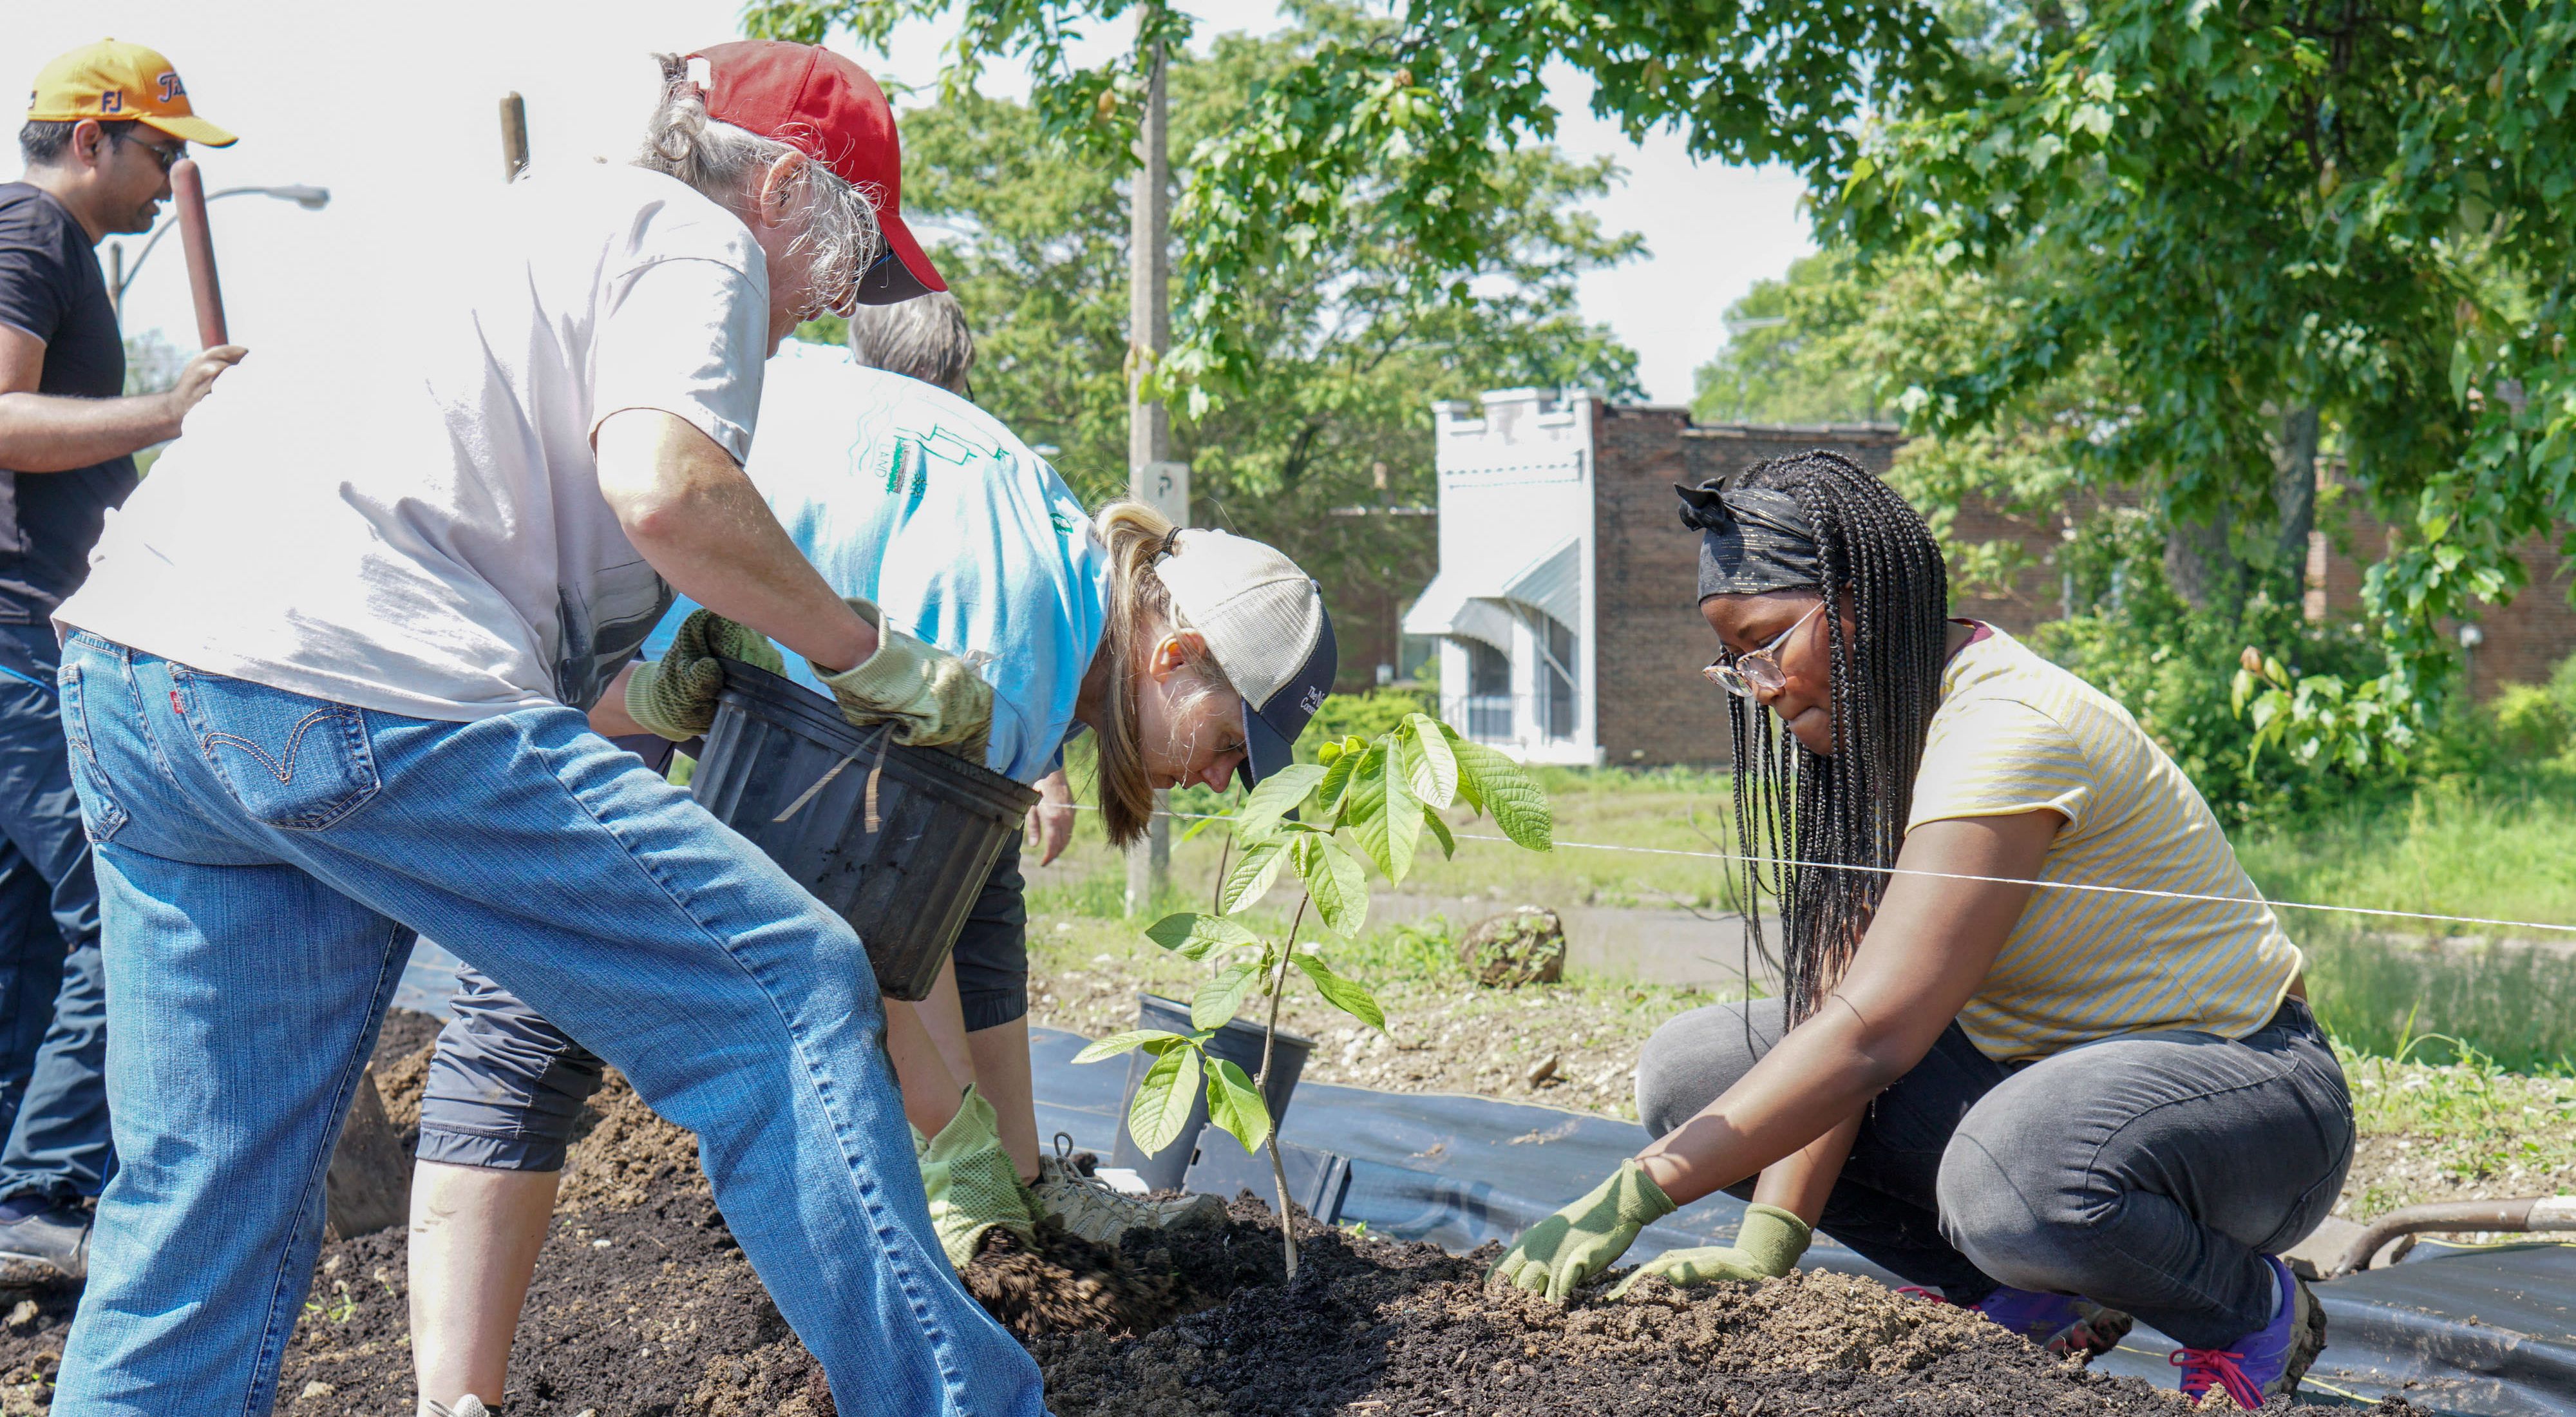 Small group of people planting trees in an urban garden.